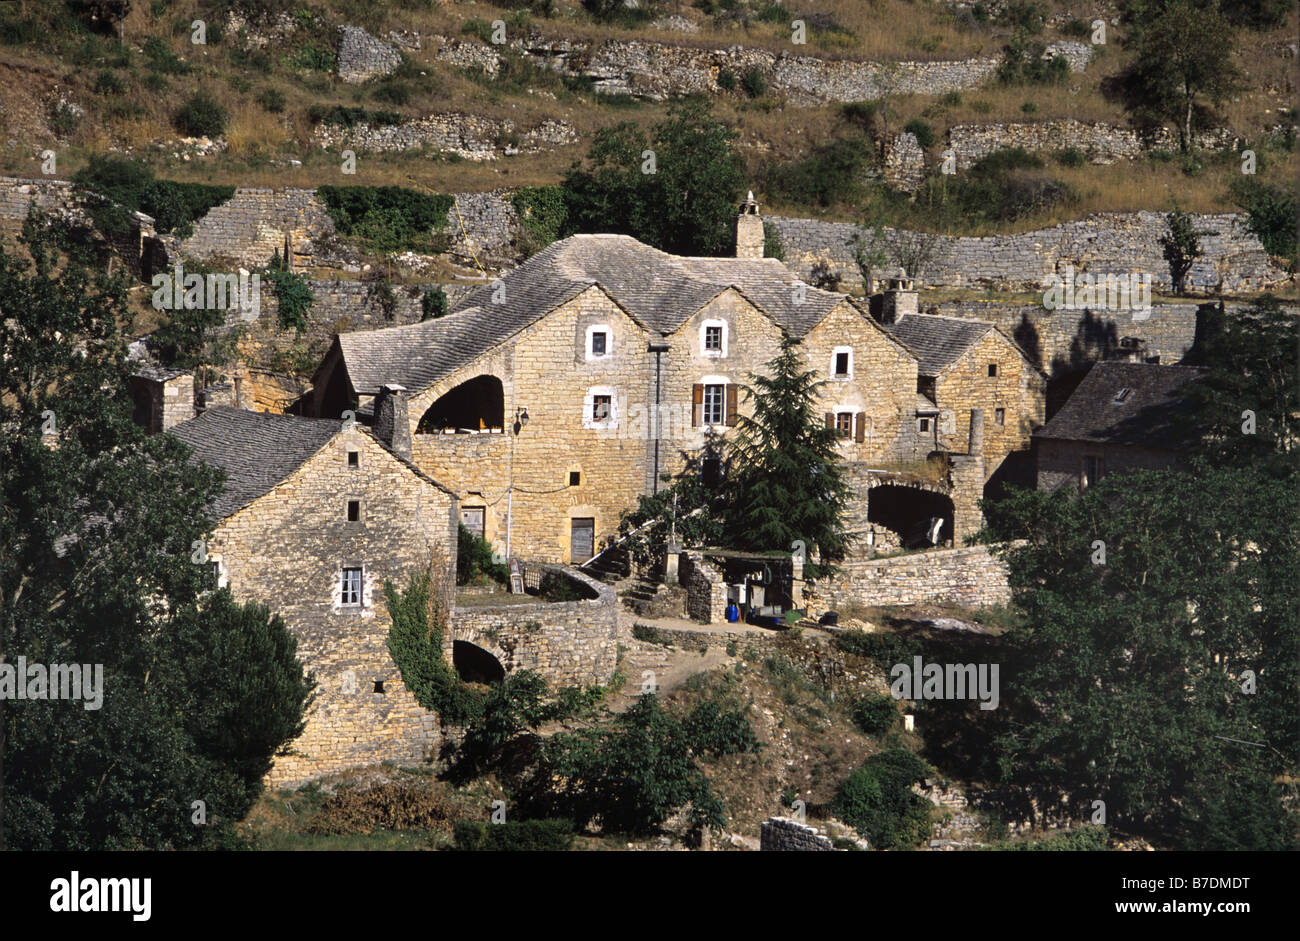 Stone House at Hauterives, a Restored Hamlet with No Road Acces, on left bank of the Tarn River, Gorges du Tarn, Lozère, France Stock Photo